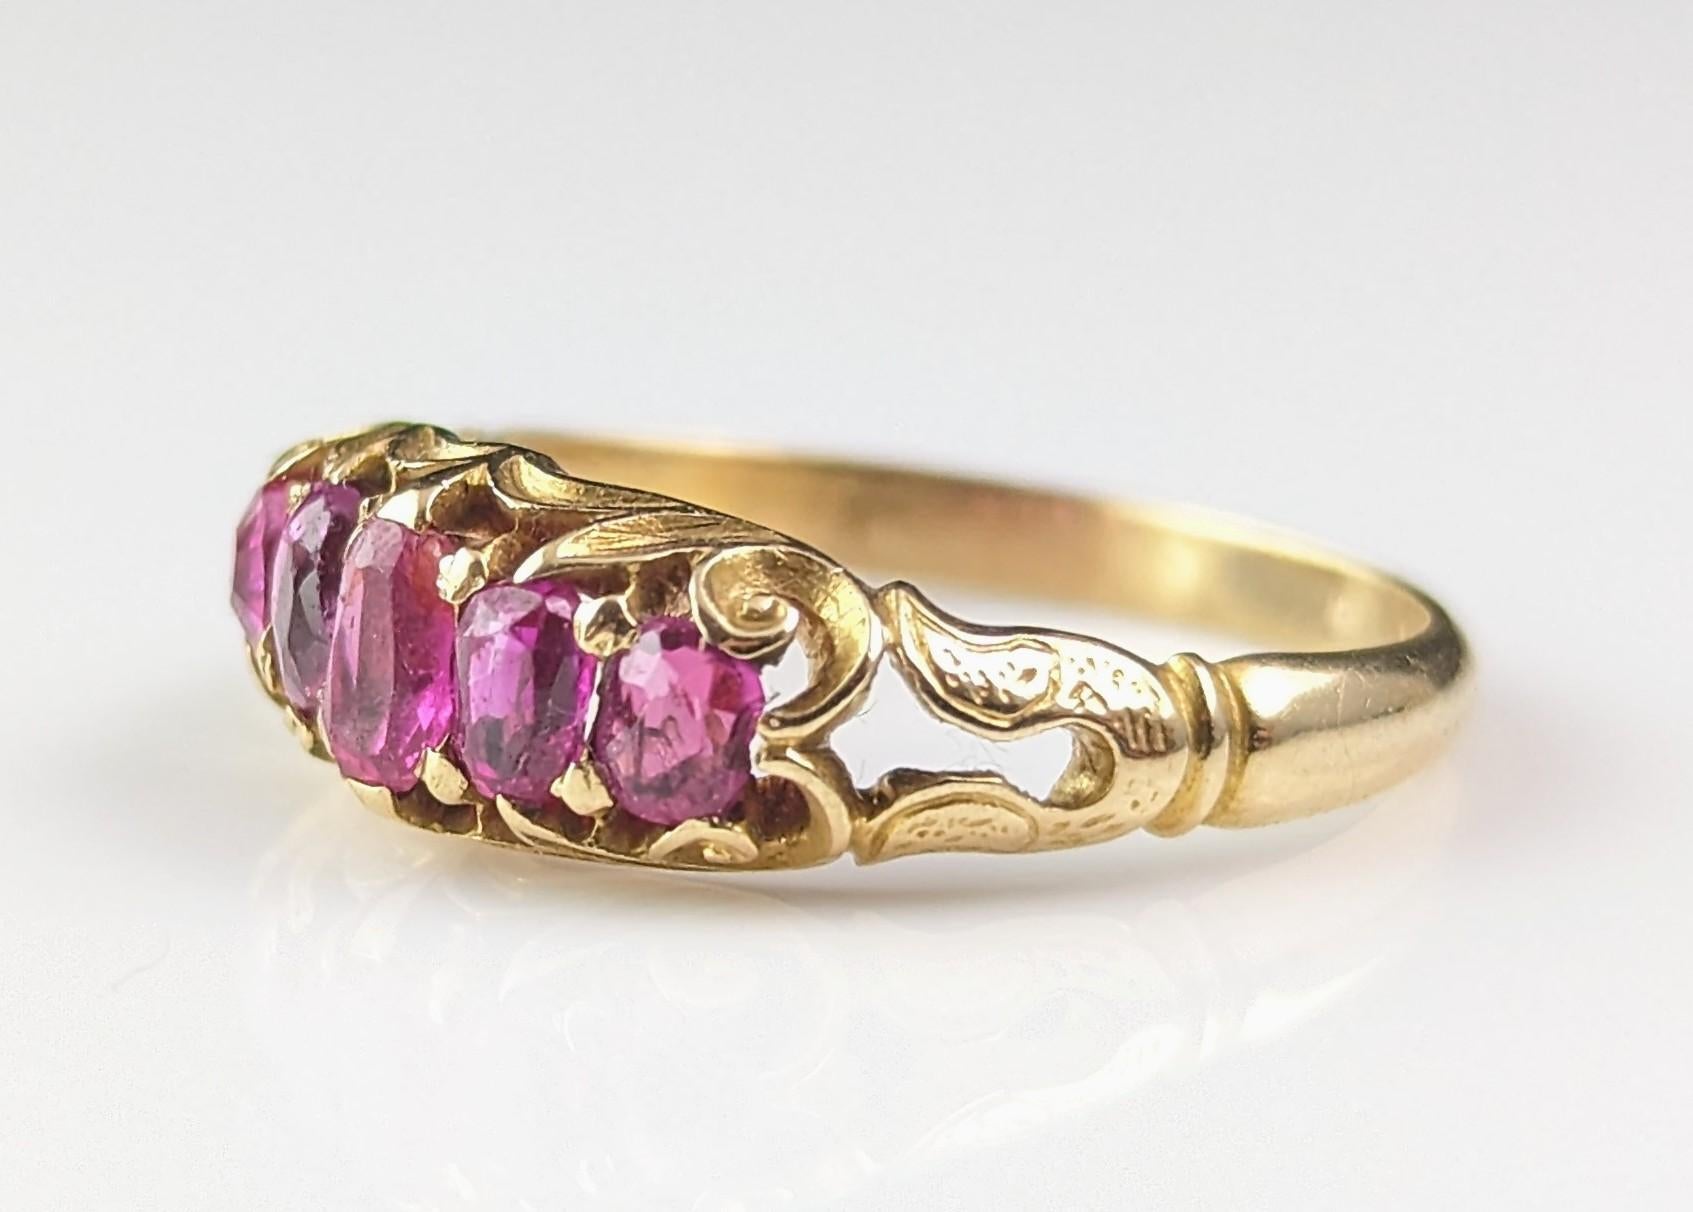 Antique Victorian five stone ruby ring, 18k yellow gold  2